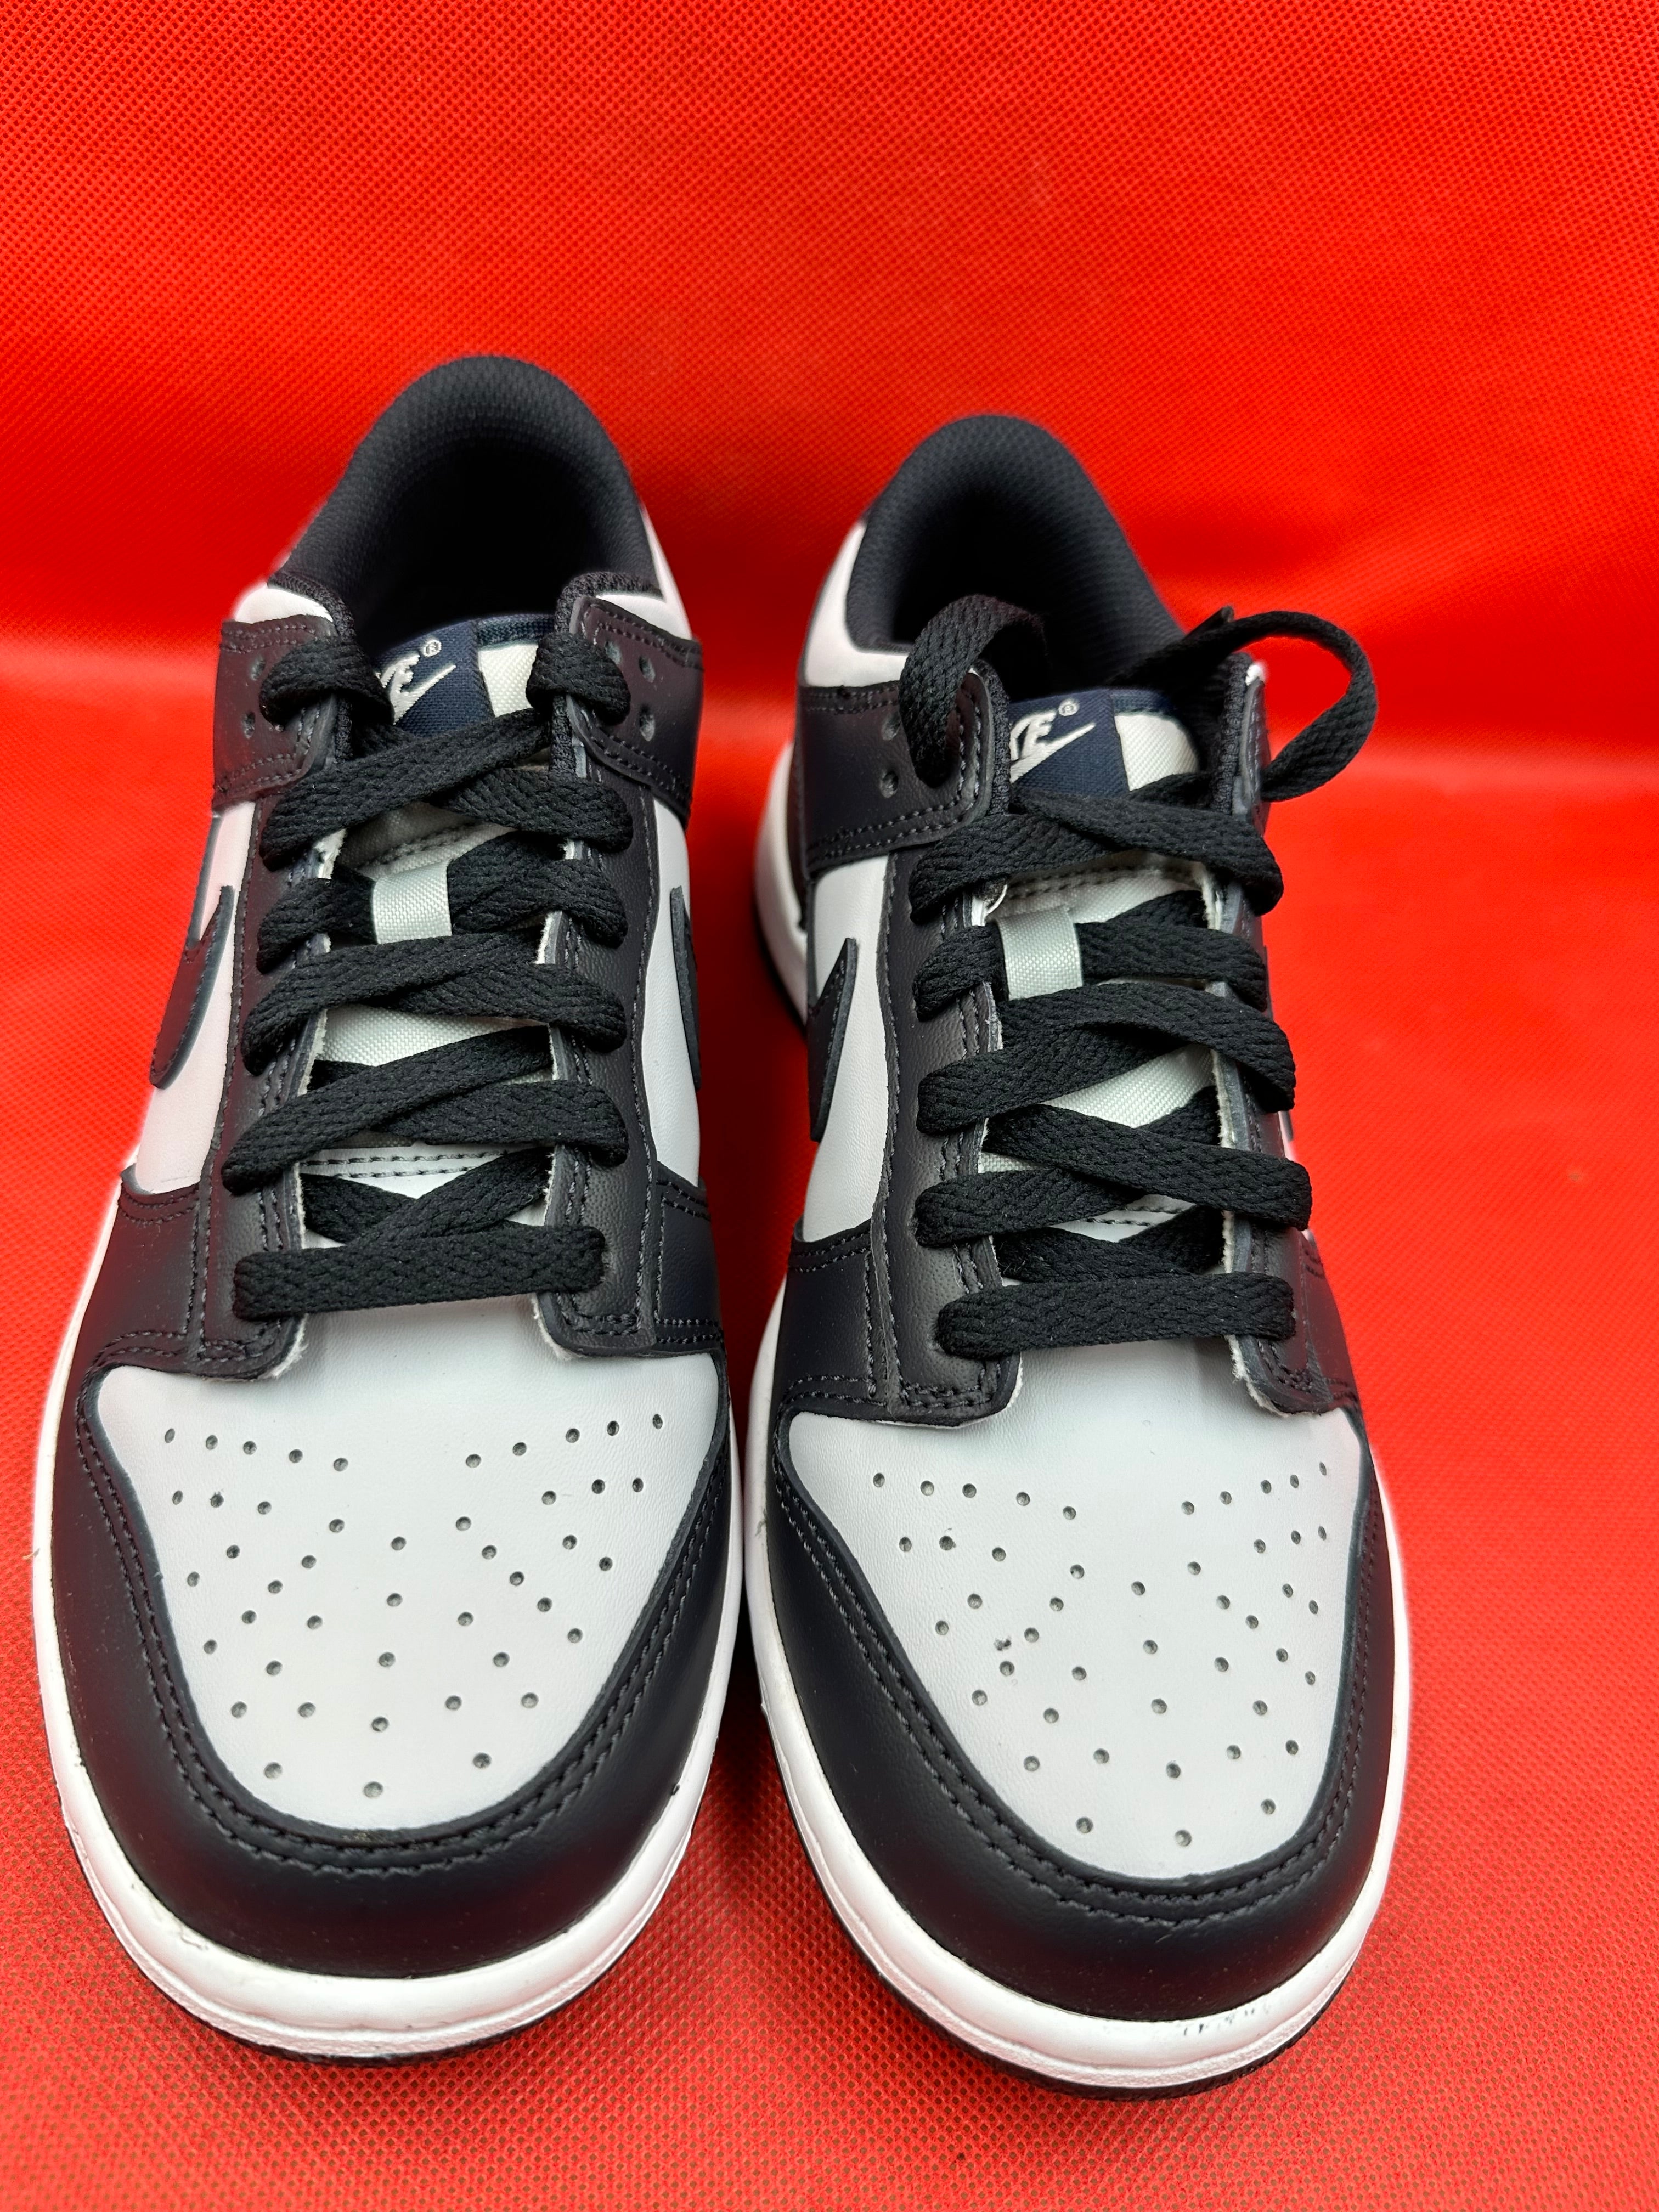 Brand new Georgetown Nike Dunk Low size 5.5